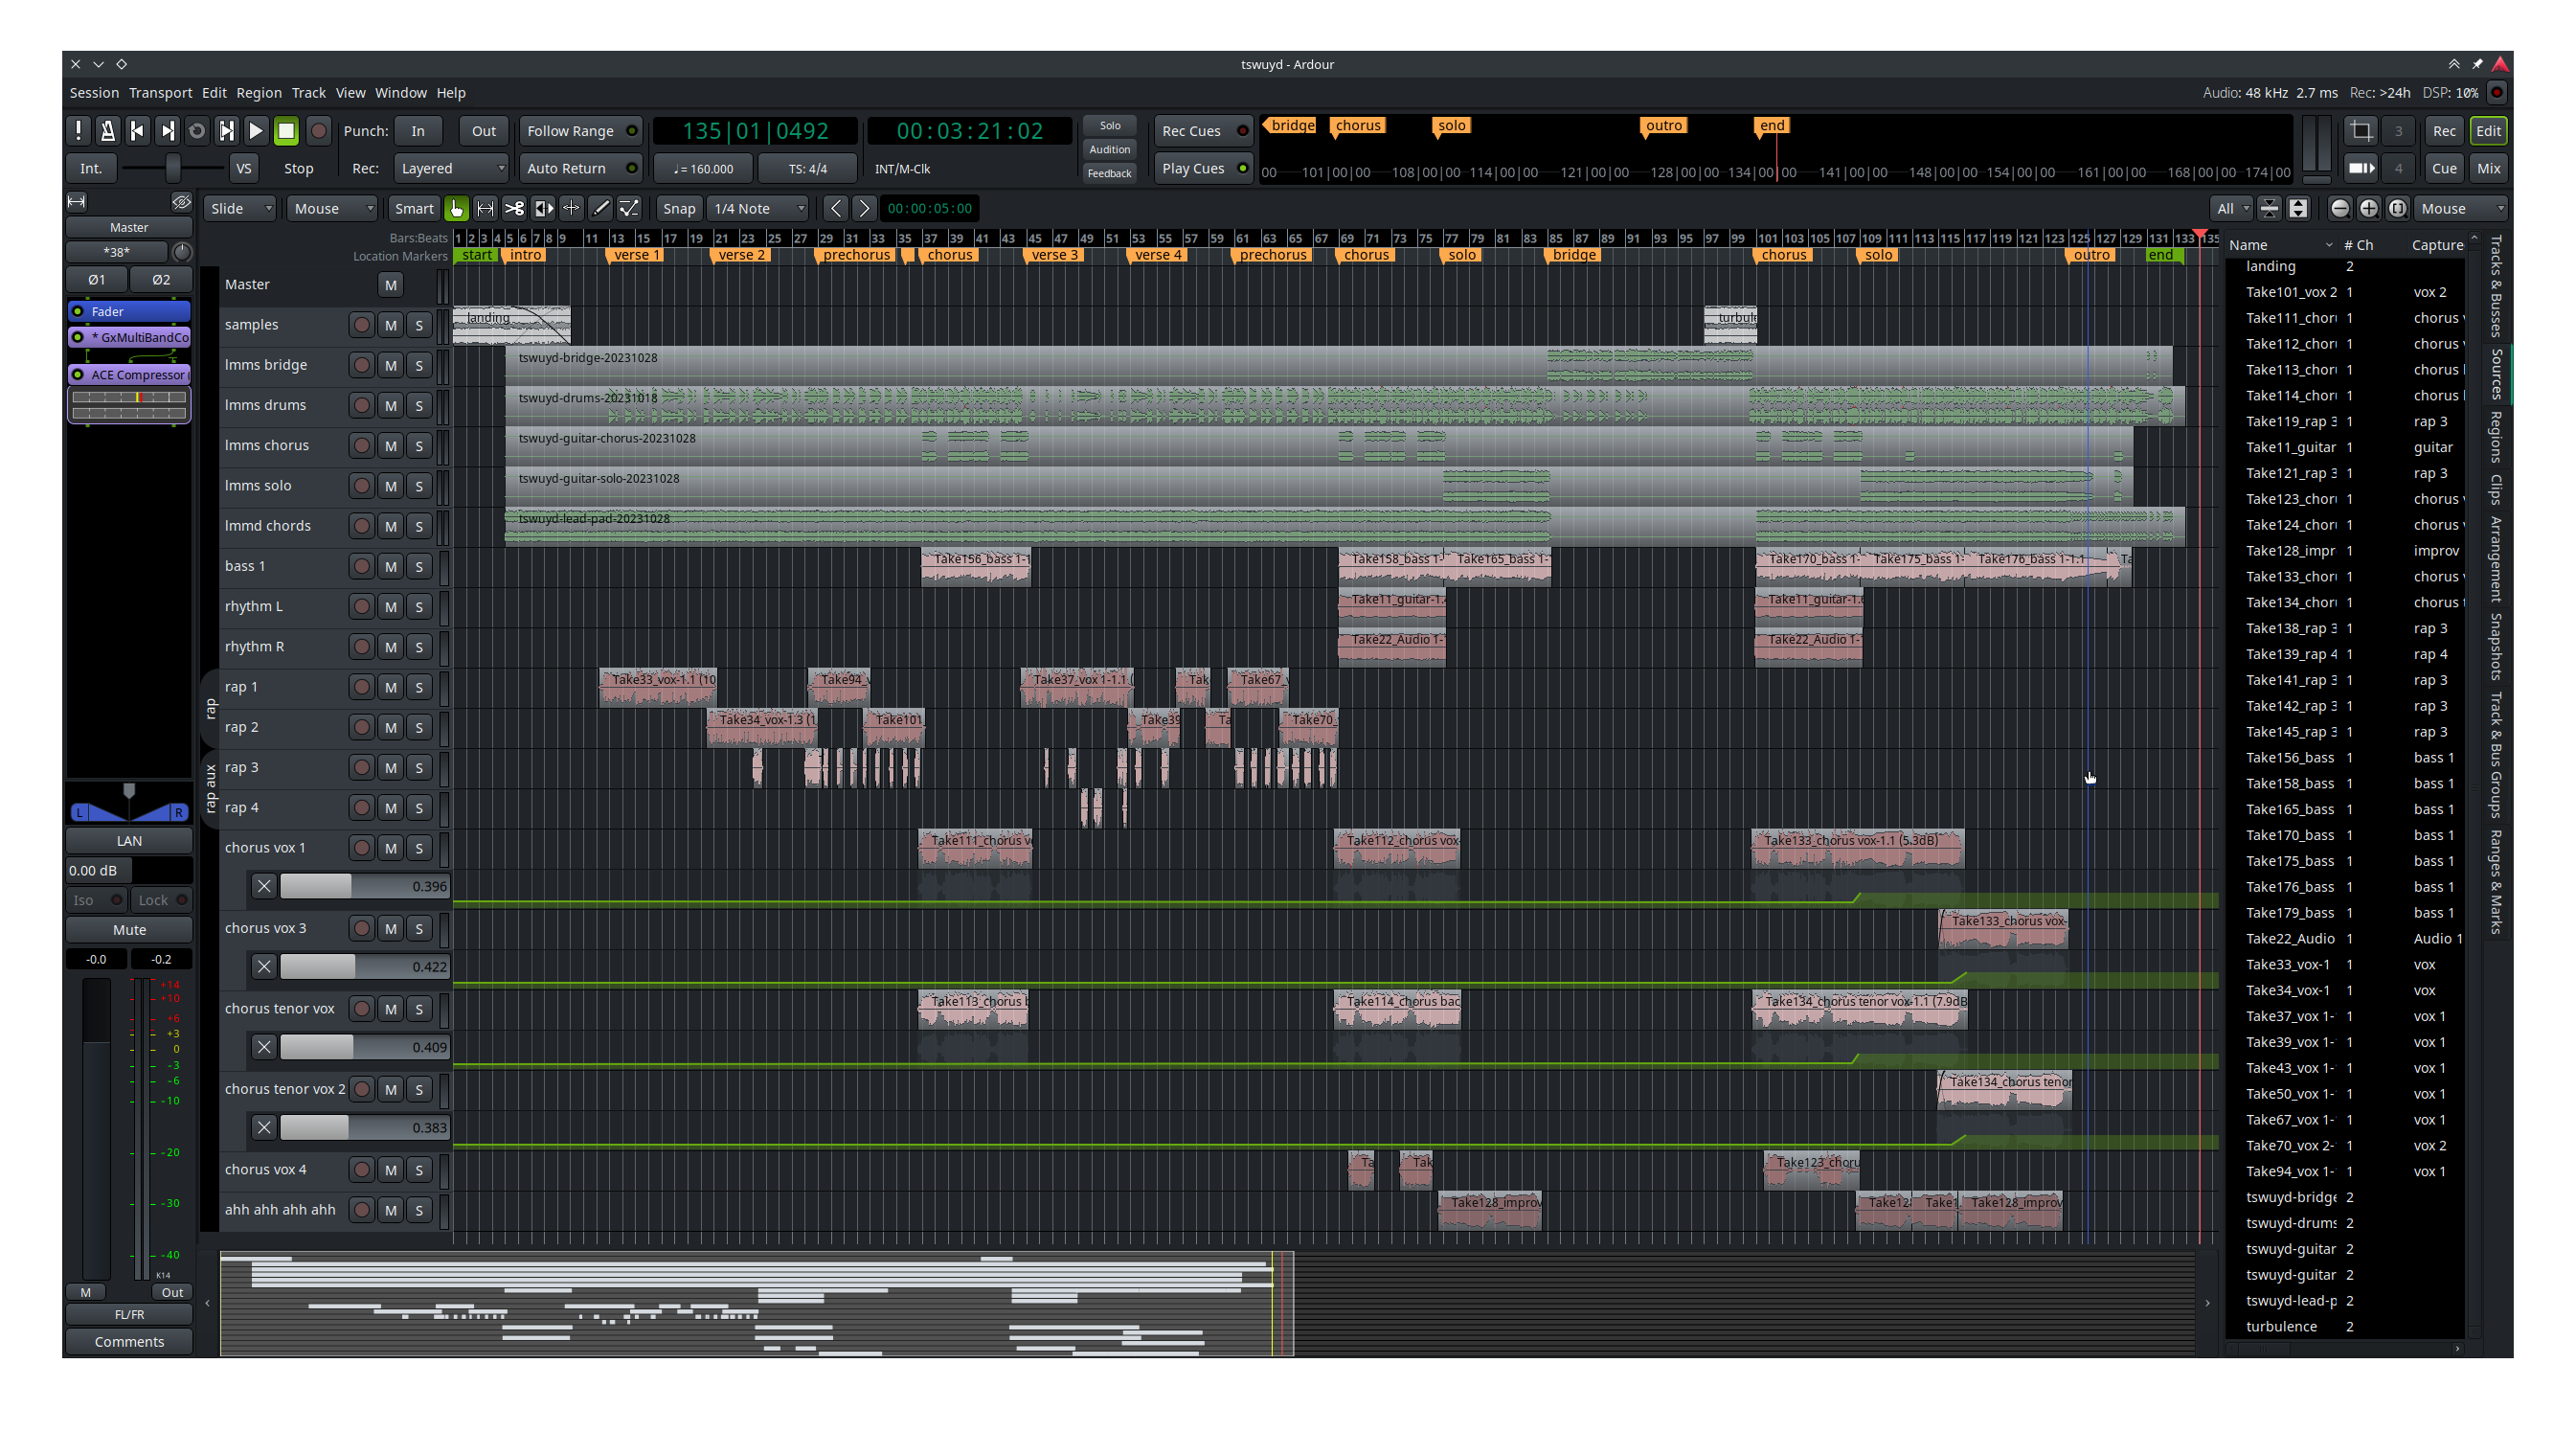 Ardour editor window. There are 19 tracks total.